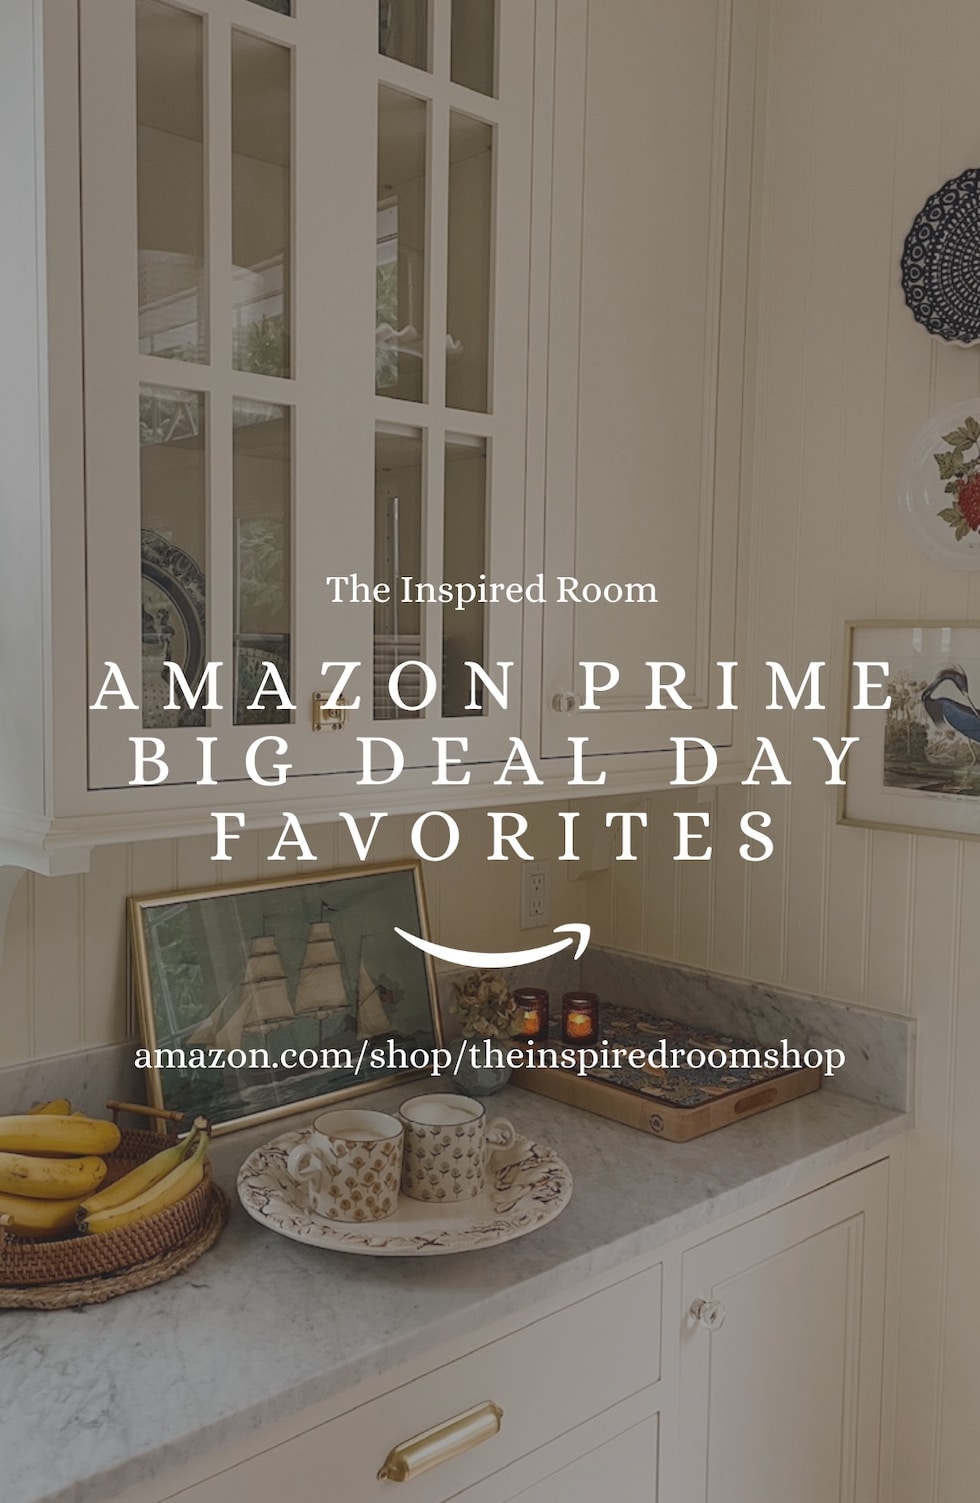 Amazon Prime Big Deal Days 2023 - The Inspired Room Favorites!